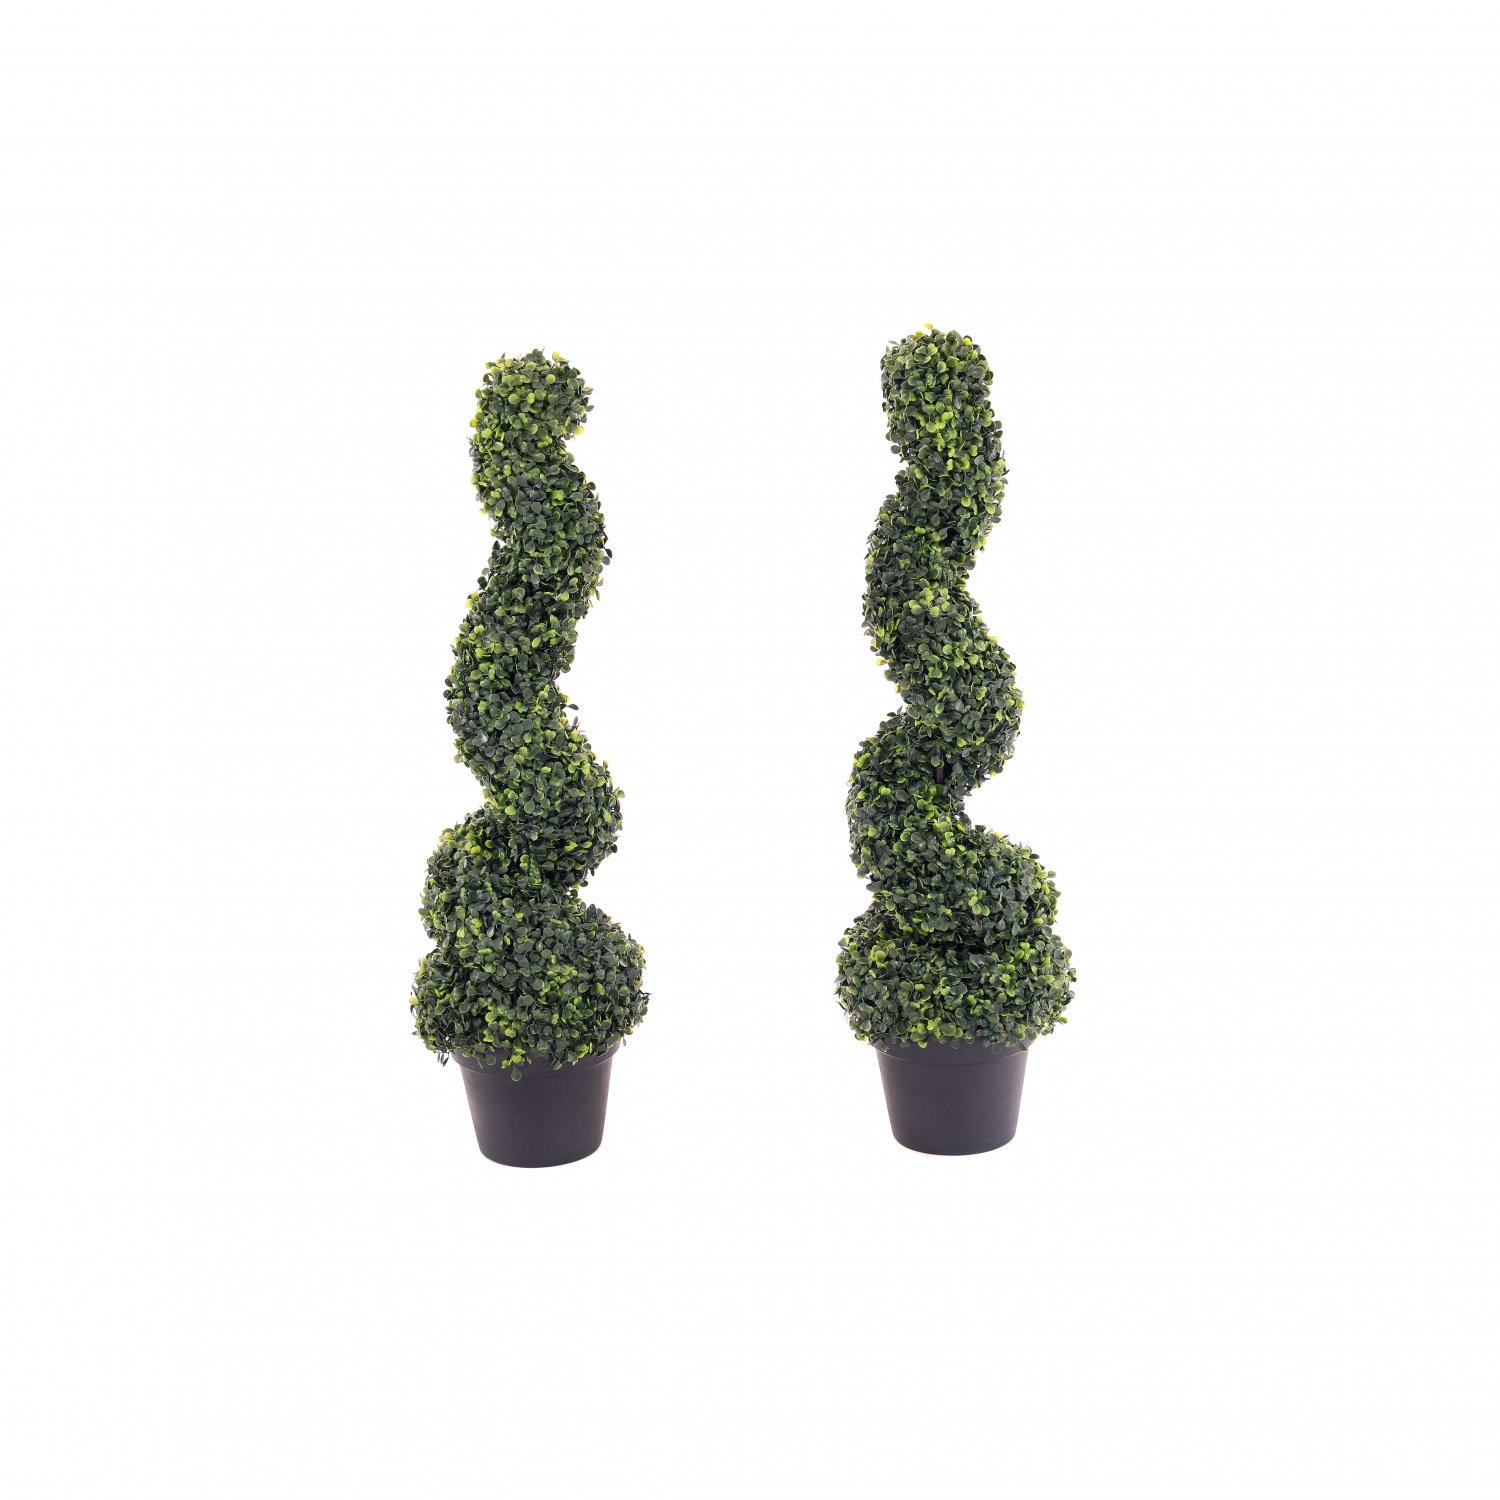 Set of 2 Artificial Topiary Boxwood Spiral Trees 80cm Indoor Outdoor Decoration